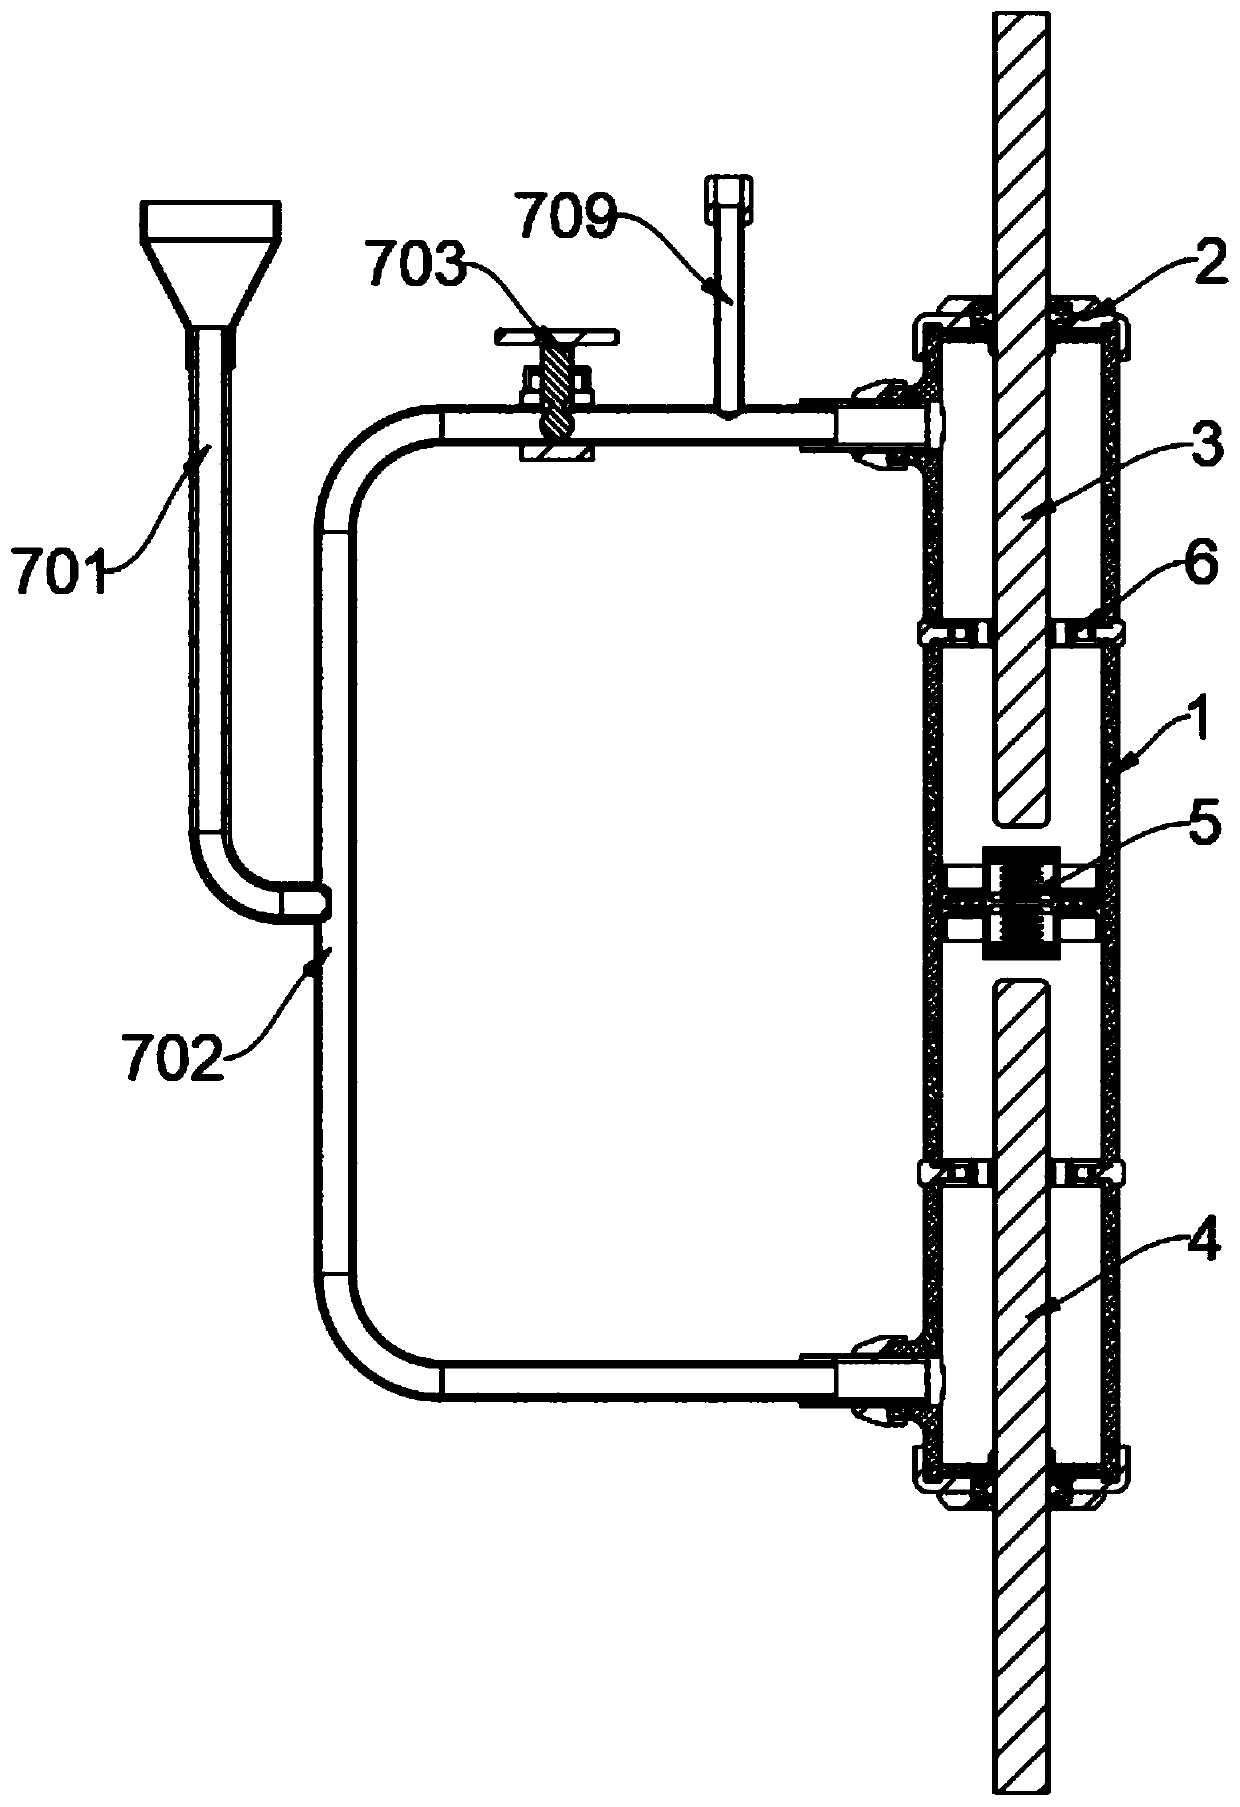 Quantitative-type grouting device of sleeve of PC component and with reinforcement positioning and sealing functions